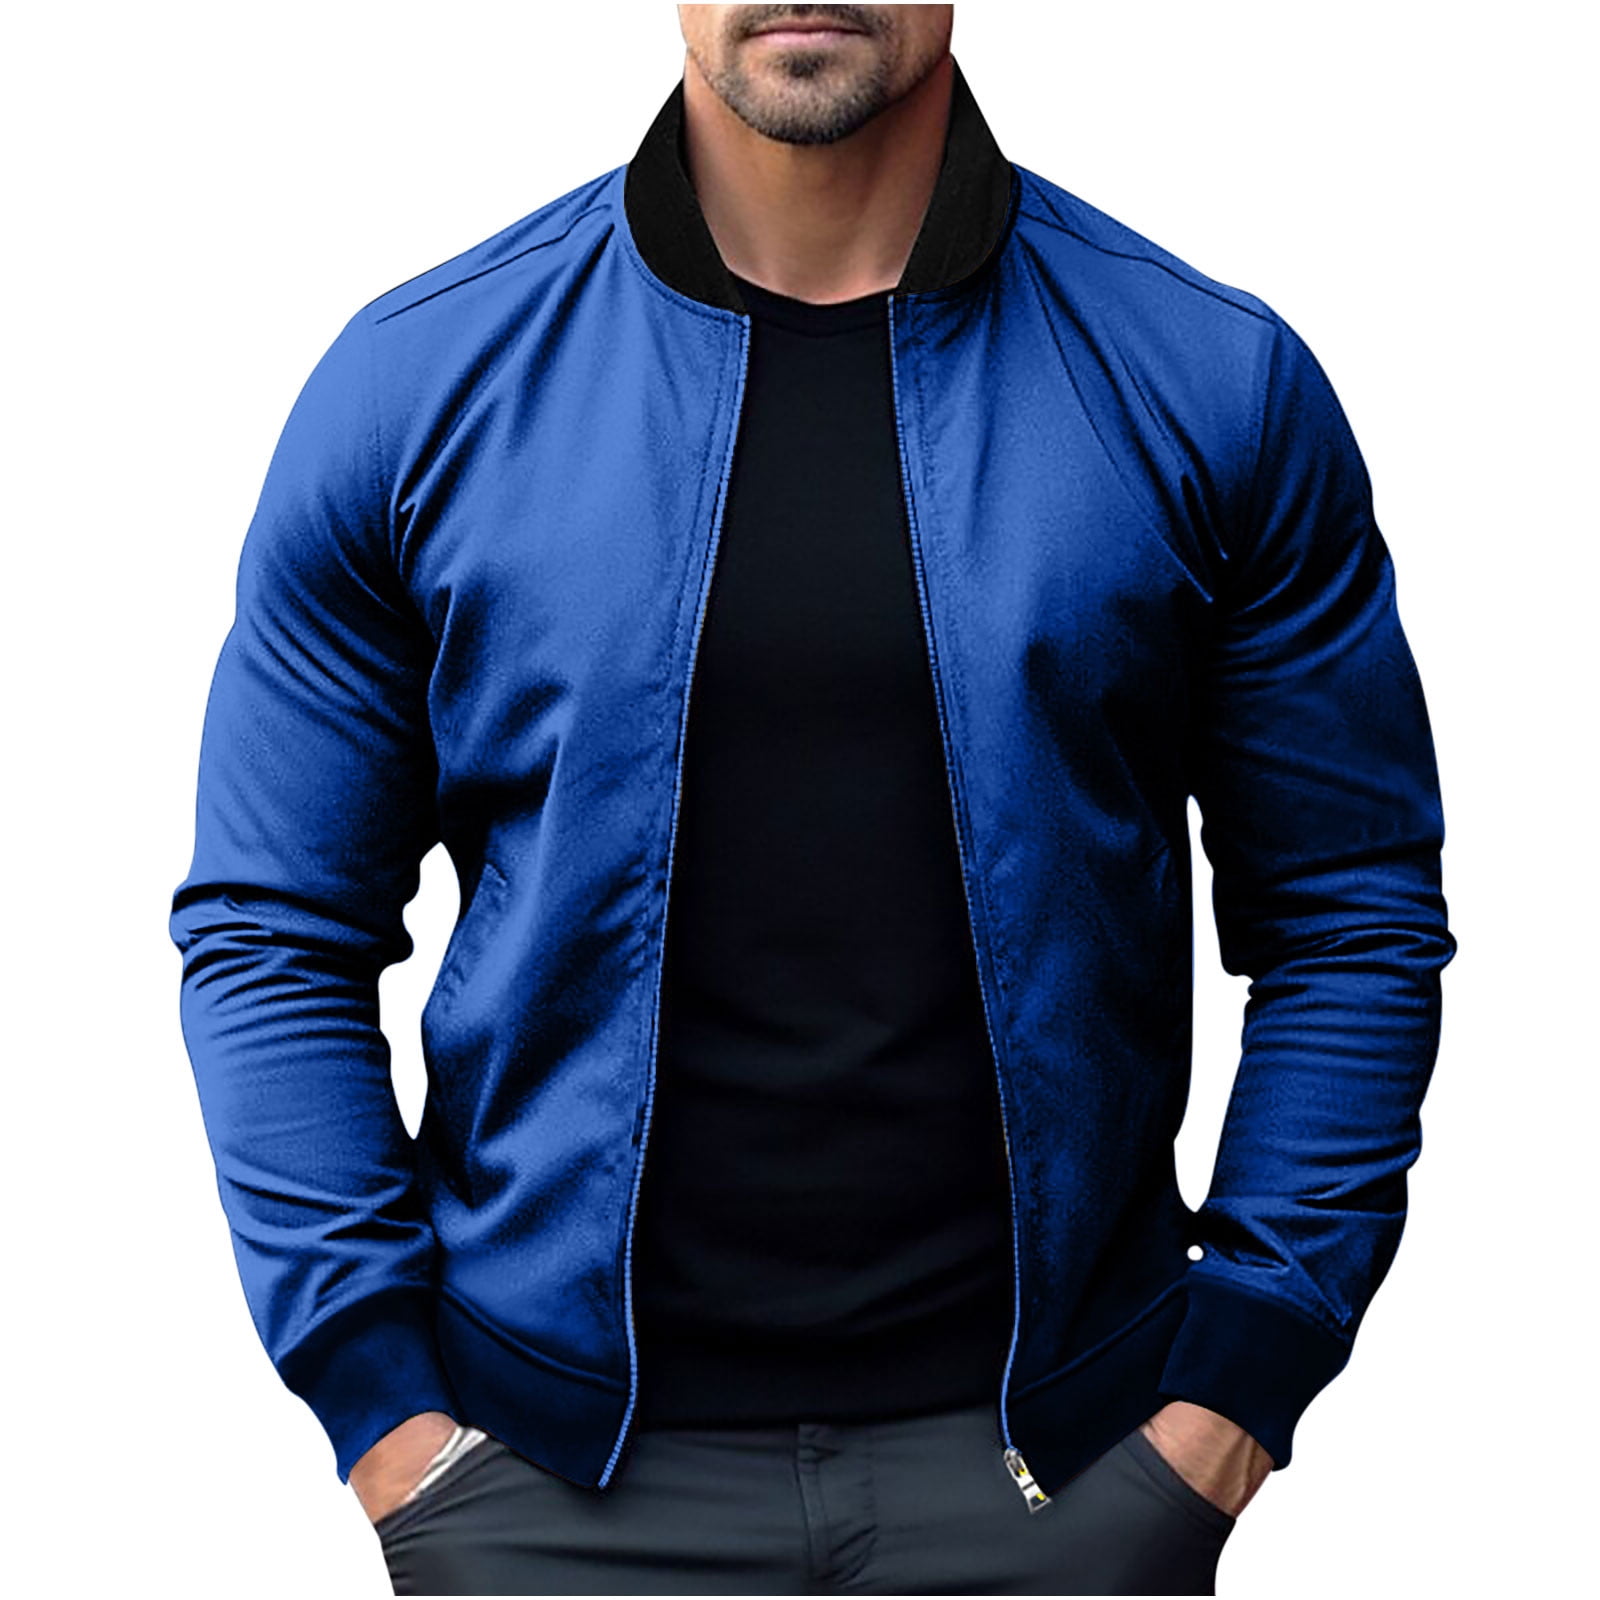 APEXFWDT Men's Bomber Jacket Lightweight Zip Up Casual Spring Fall ...